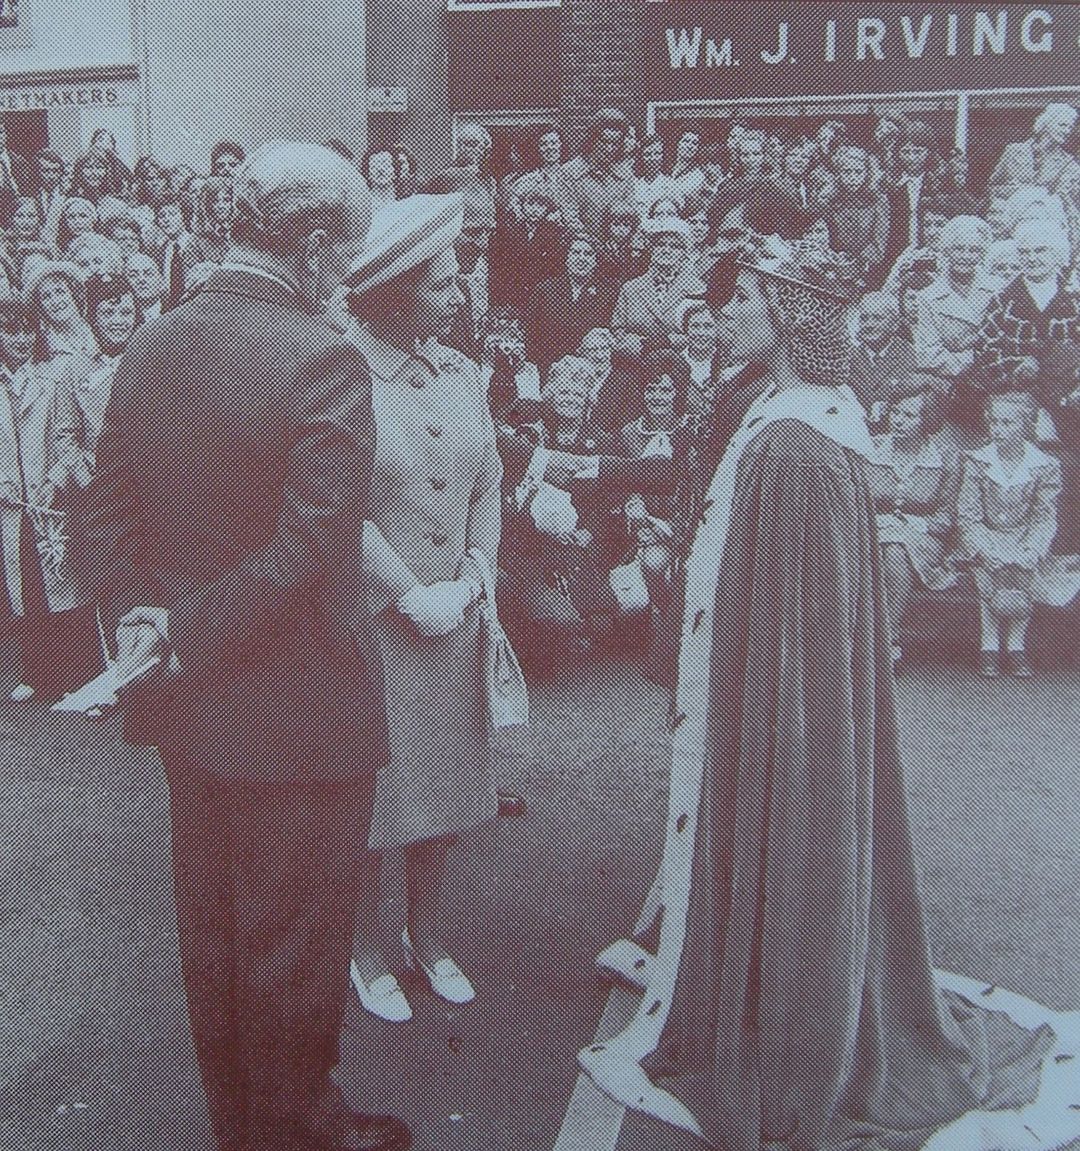 When Her Majesty came to Annan